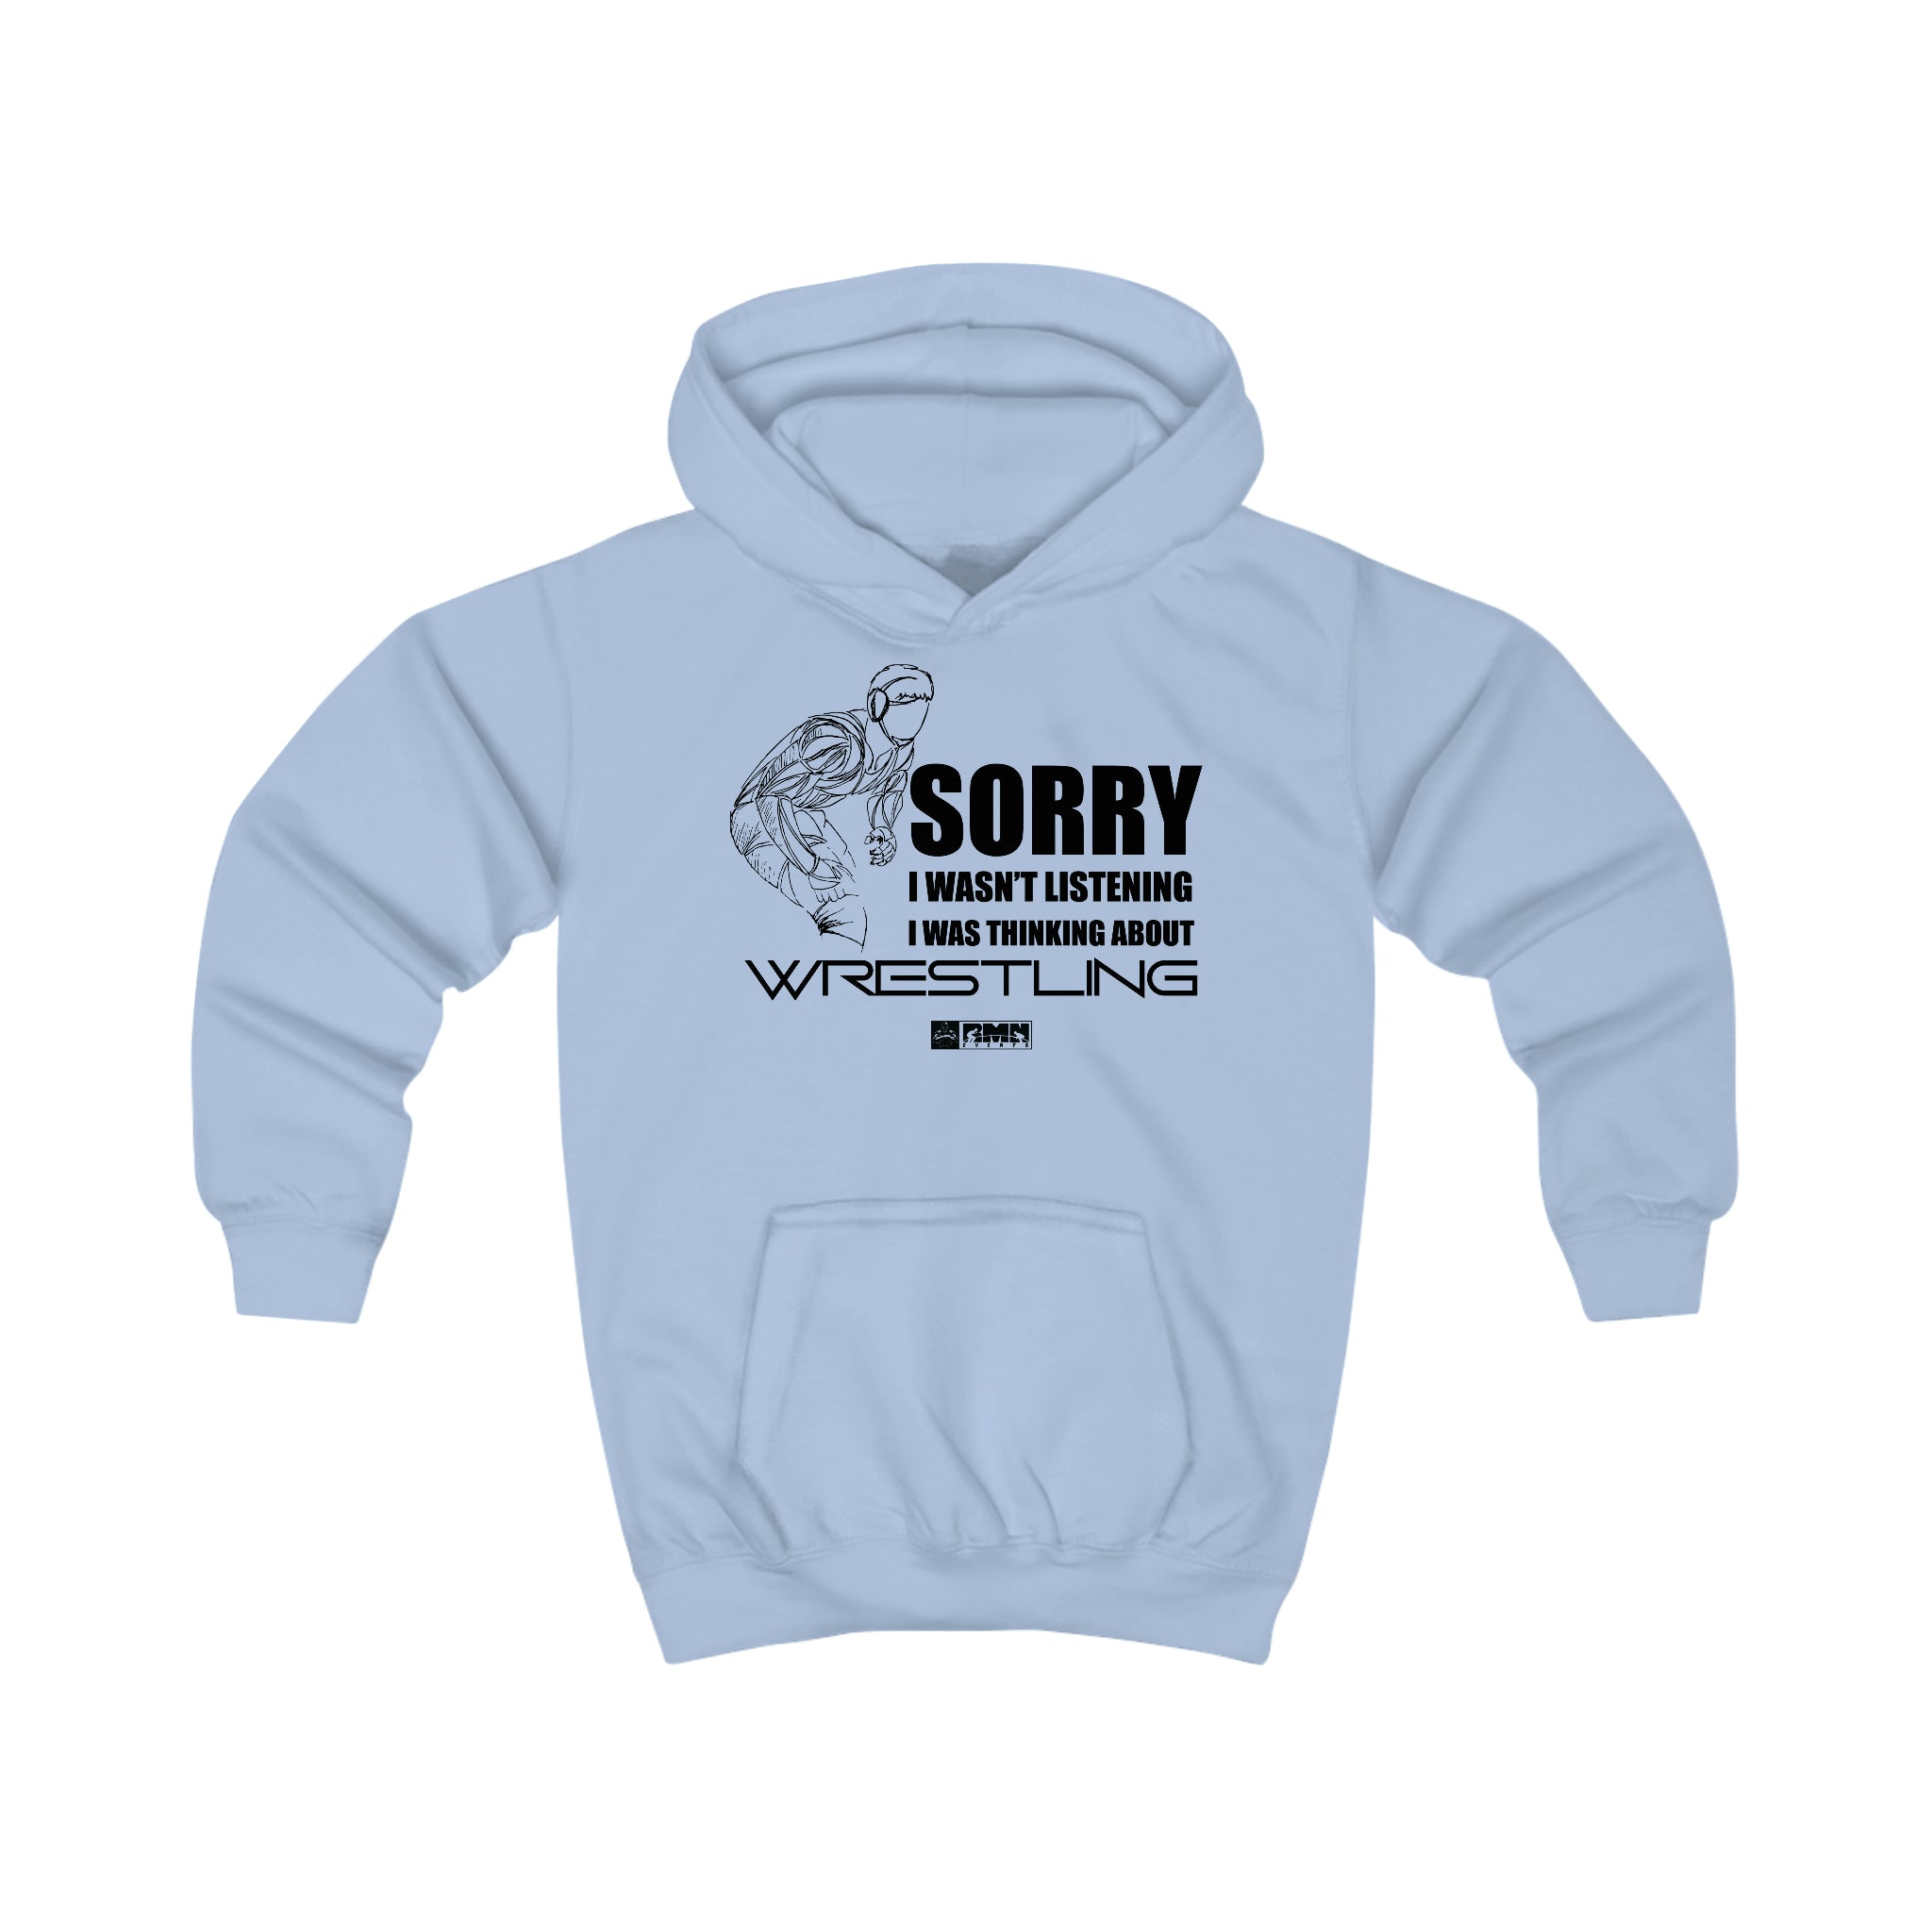 I Was Thinking About Wrestling Kids Hoodie by XPA Gear